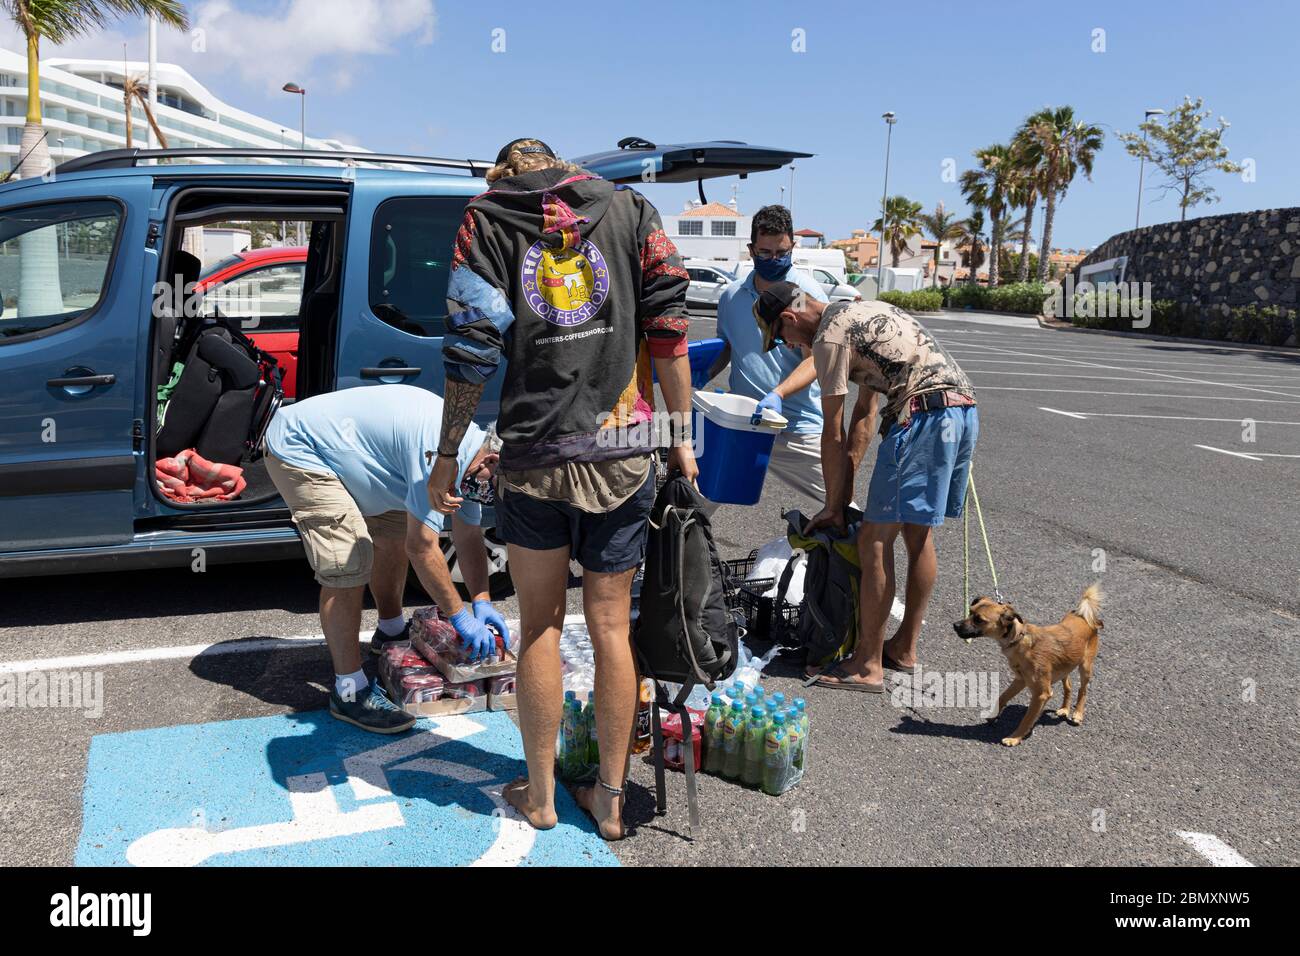 La Caleta, Costa Adeje, Tenerife, Canary Islands. 11 May 2020. Food bank charity El Arca de Noe, Noahs Ark, run by British residents provide food, water and soft drinks to a group of homeless people living rough along the Costa Adeje coastline. They rely on donations from local businesses and distribute basic foodstuffs to over a hundred people three times a week. Stock Photo